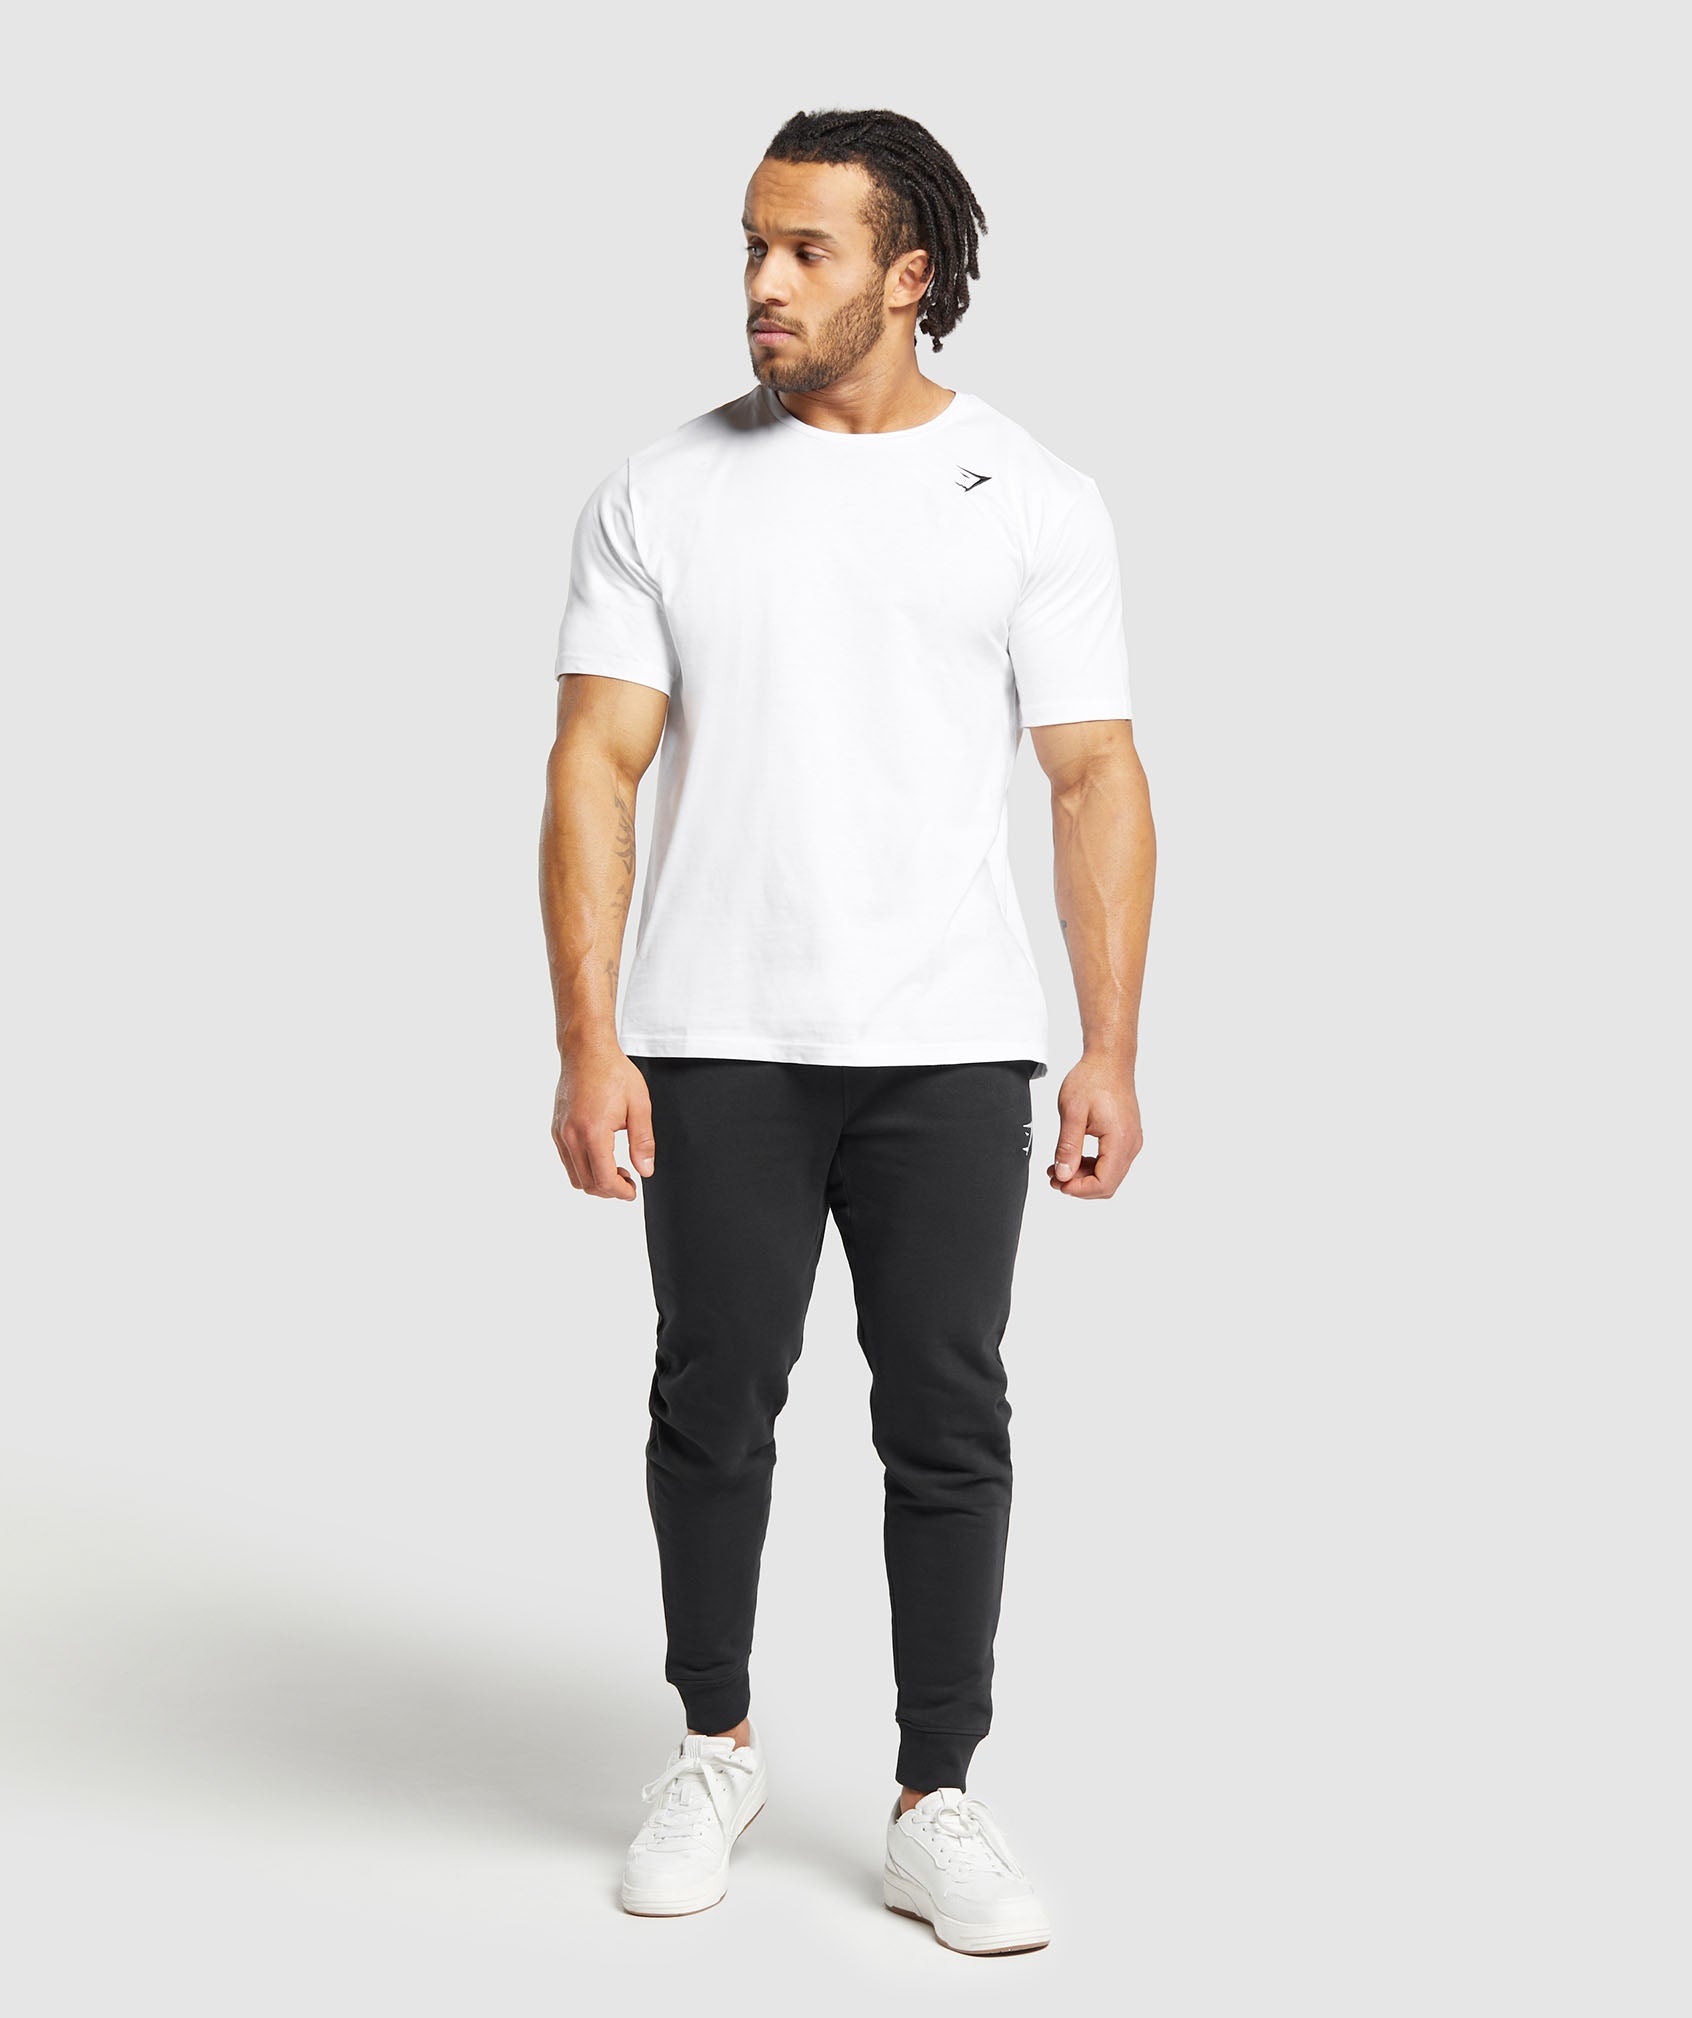 Crest Joggers in Black - view 3